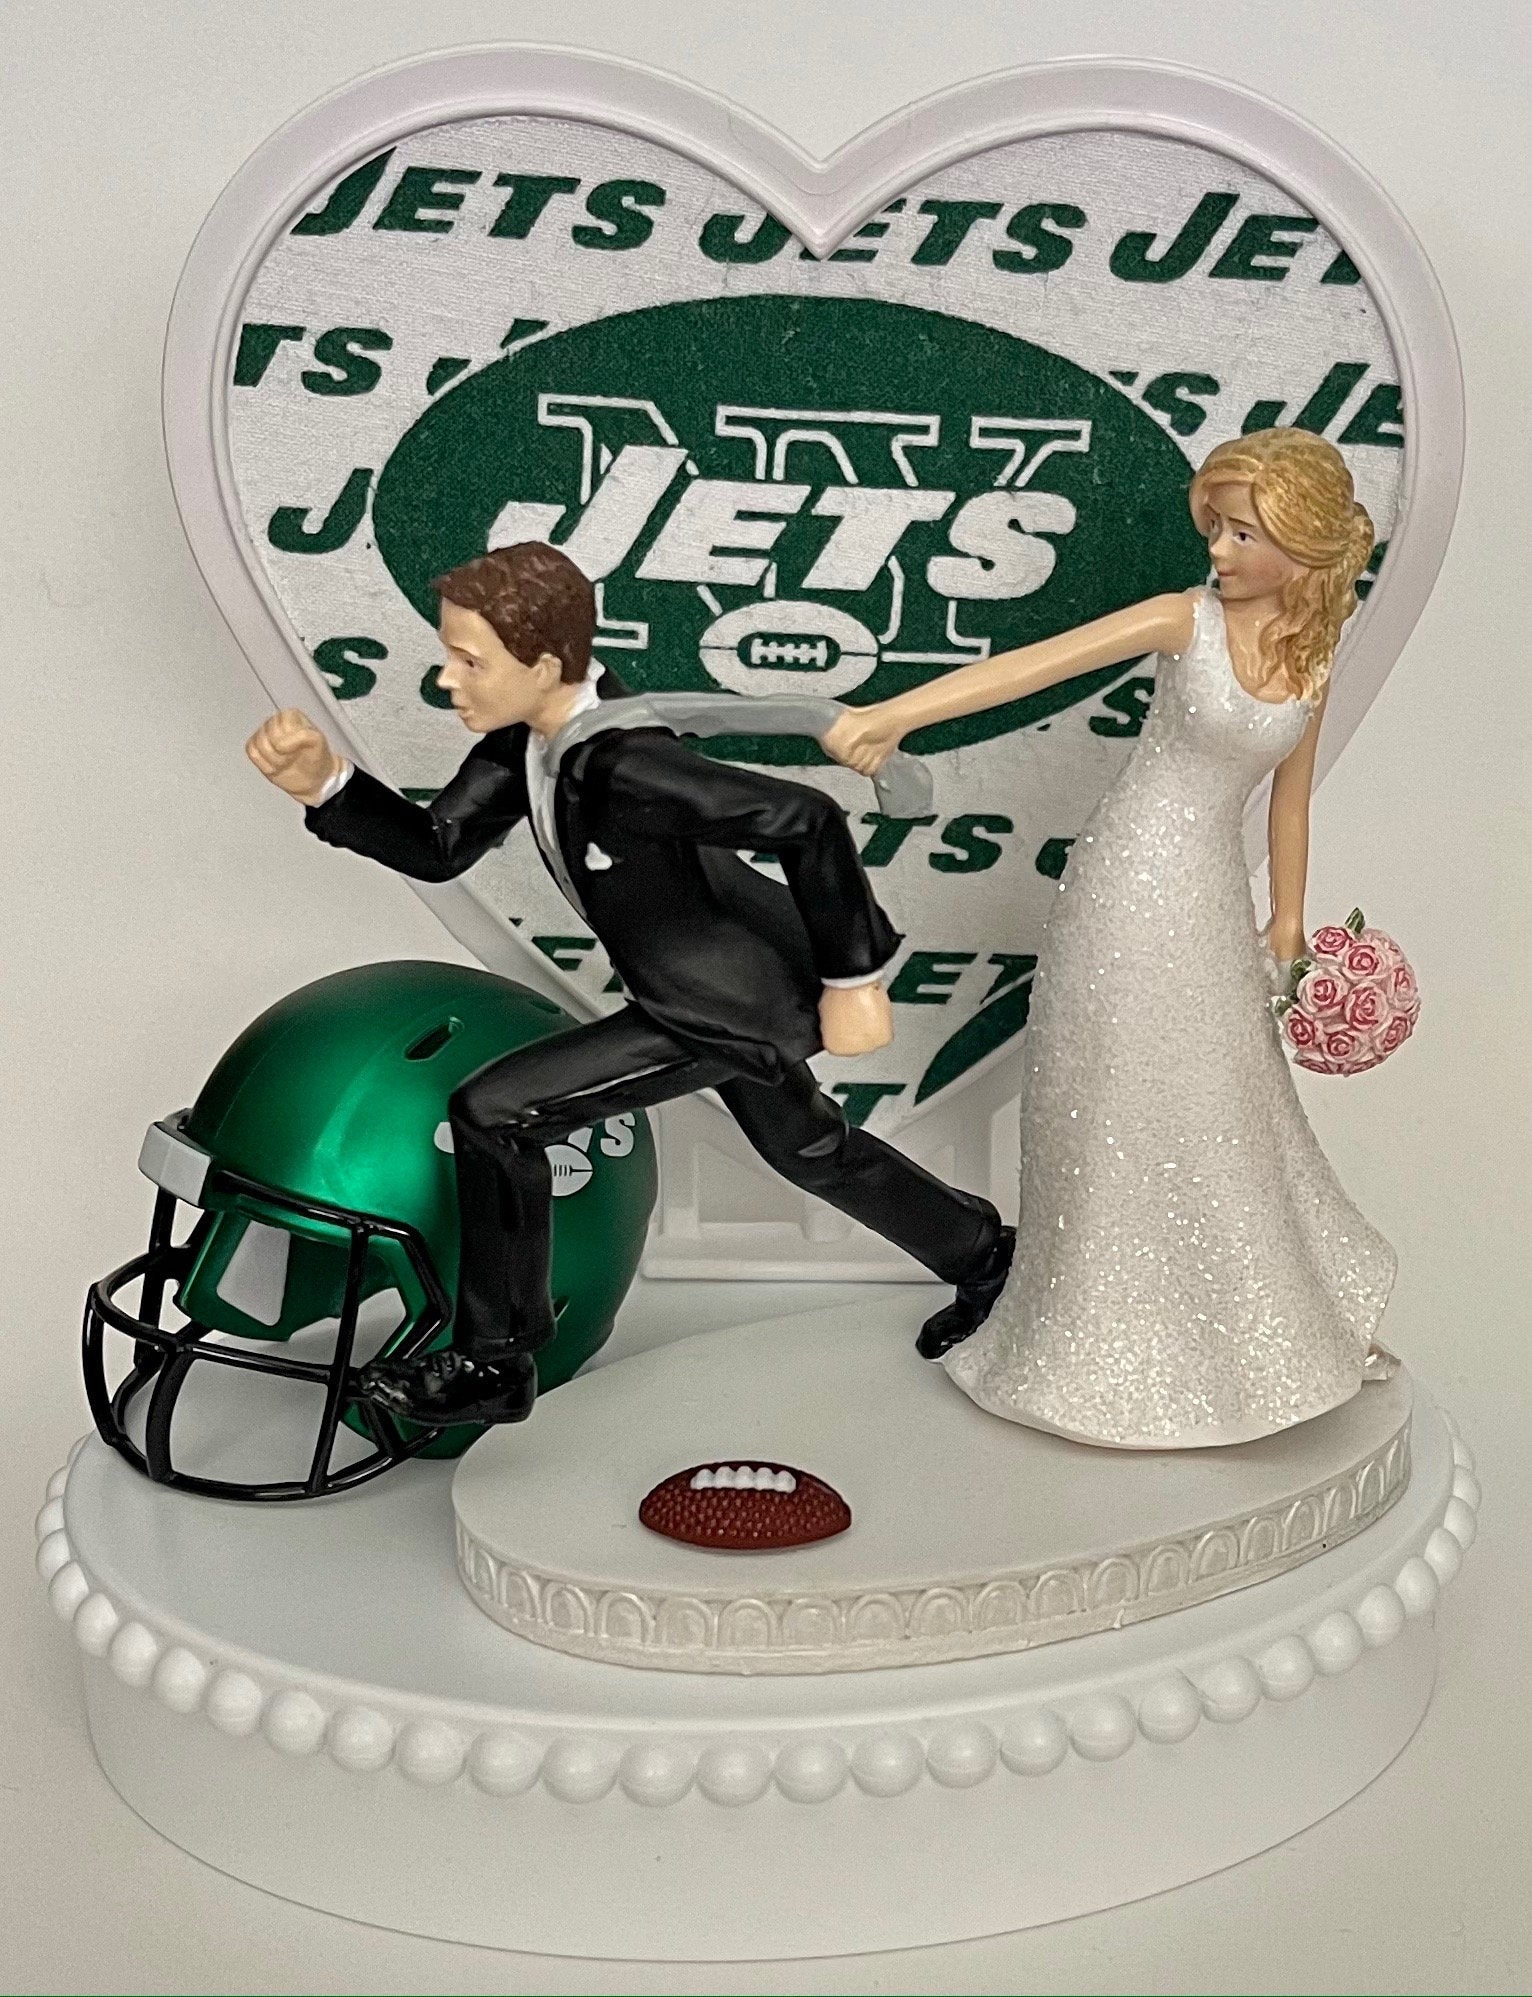 Wedding Cake Topper New York Jets NY Football Themed One-of-a-Kind Humorous Groom's Cake Top Sports Fans Funny Bridal Shower Gift Idea